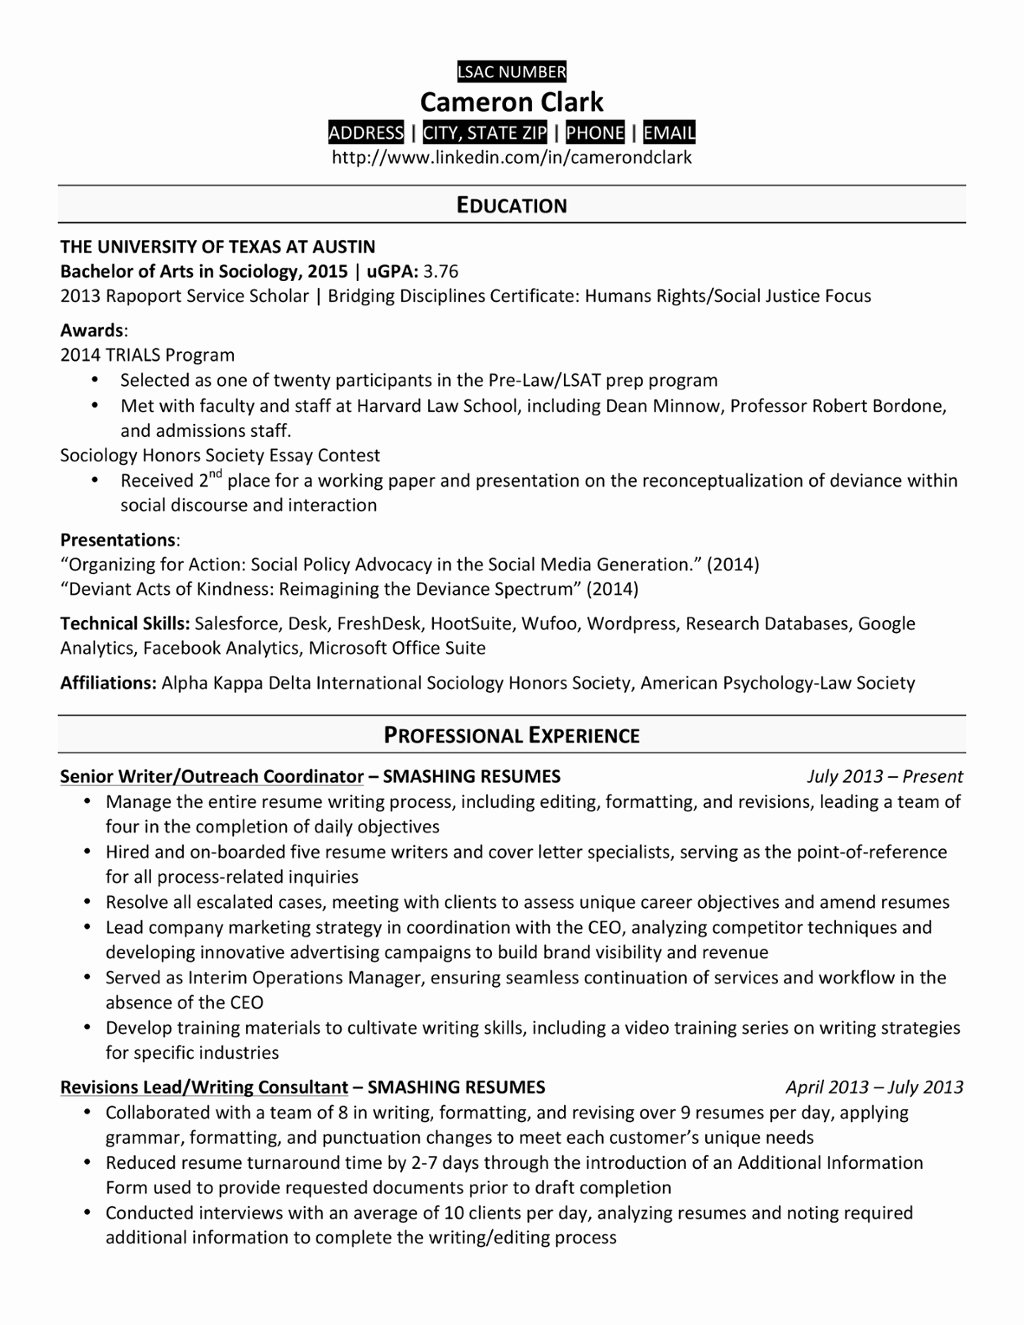 A Law School Resume that Made the Cut